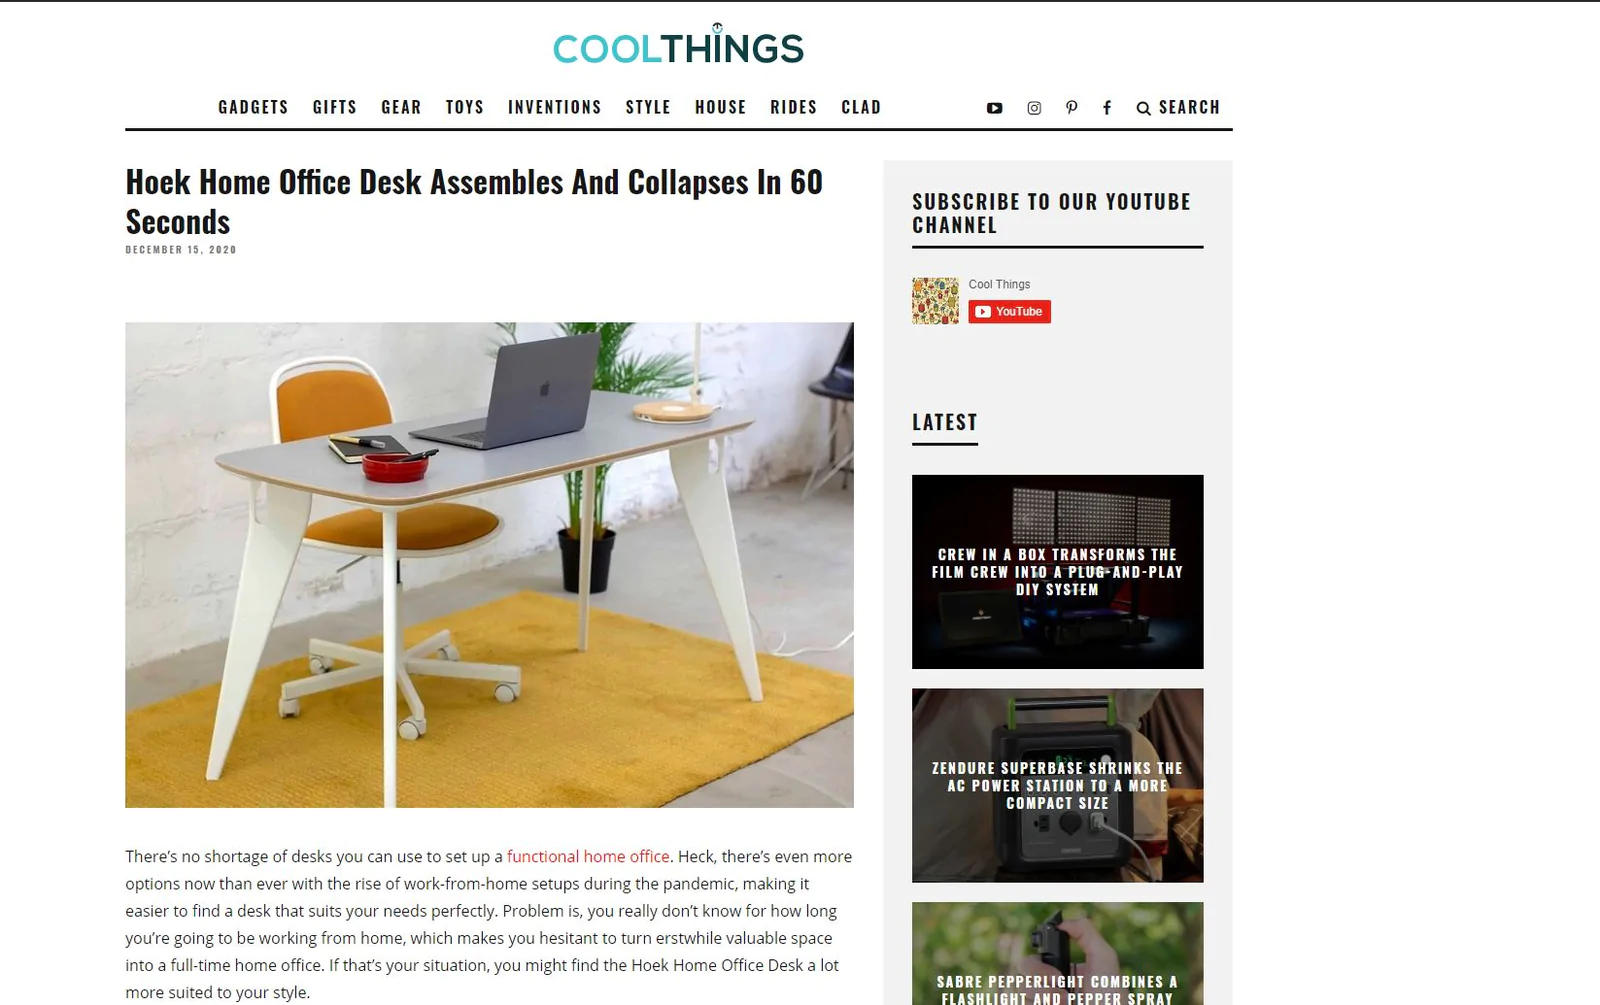 Hoek Has Been Featured by CoolThings!